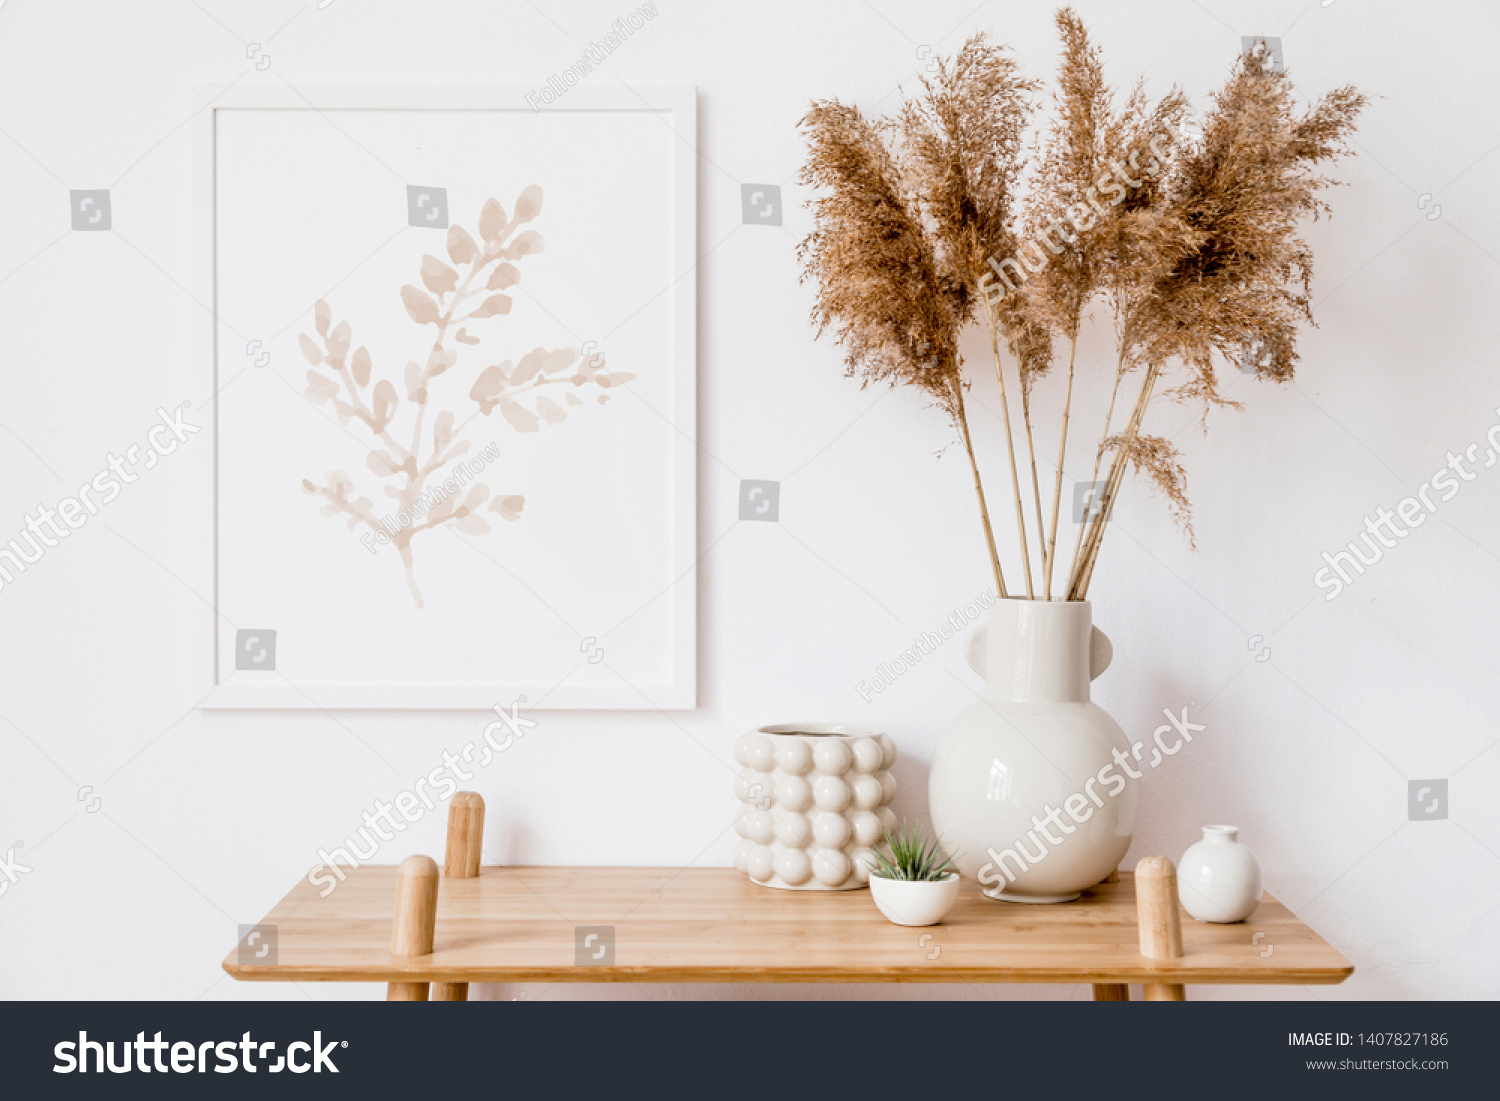 Stylish korean interior of living room with white mock up poster frame, elegant accessories, air plant, wooden shelf and vase with flowers. Minimalistic concept of home decor. Template. Bright room. #1407827186